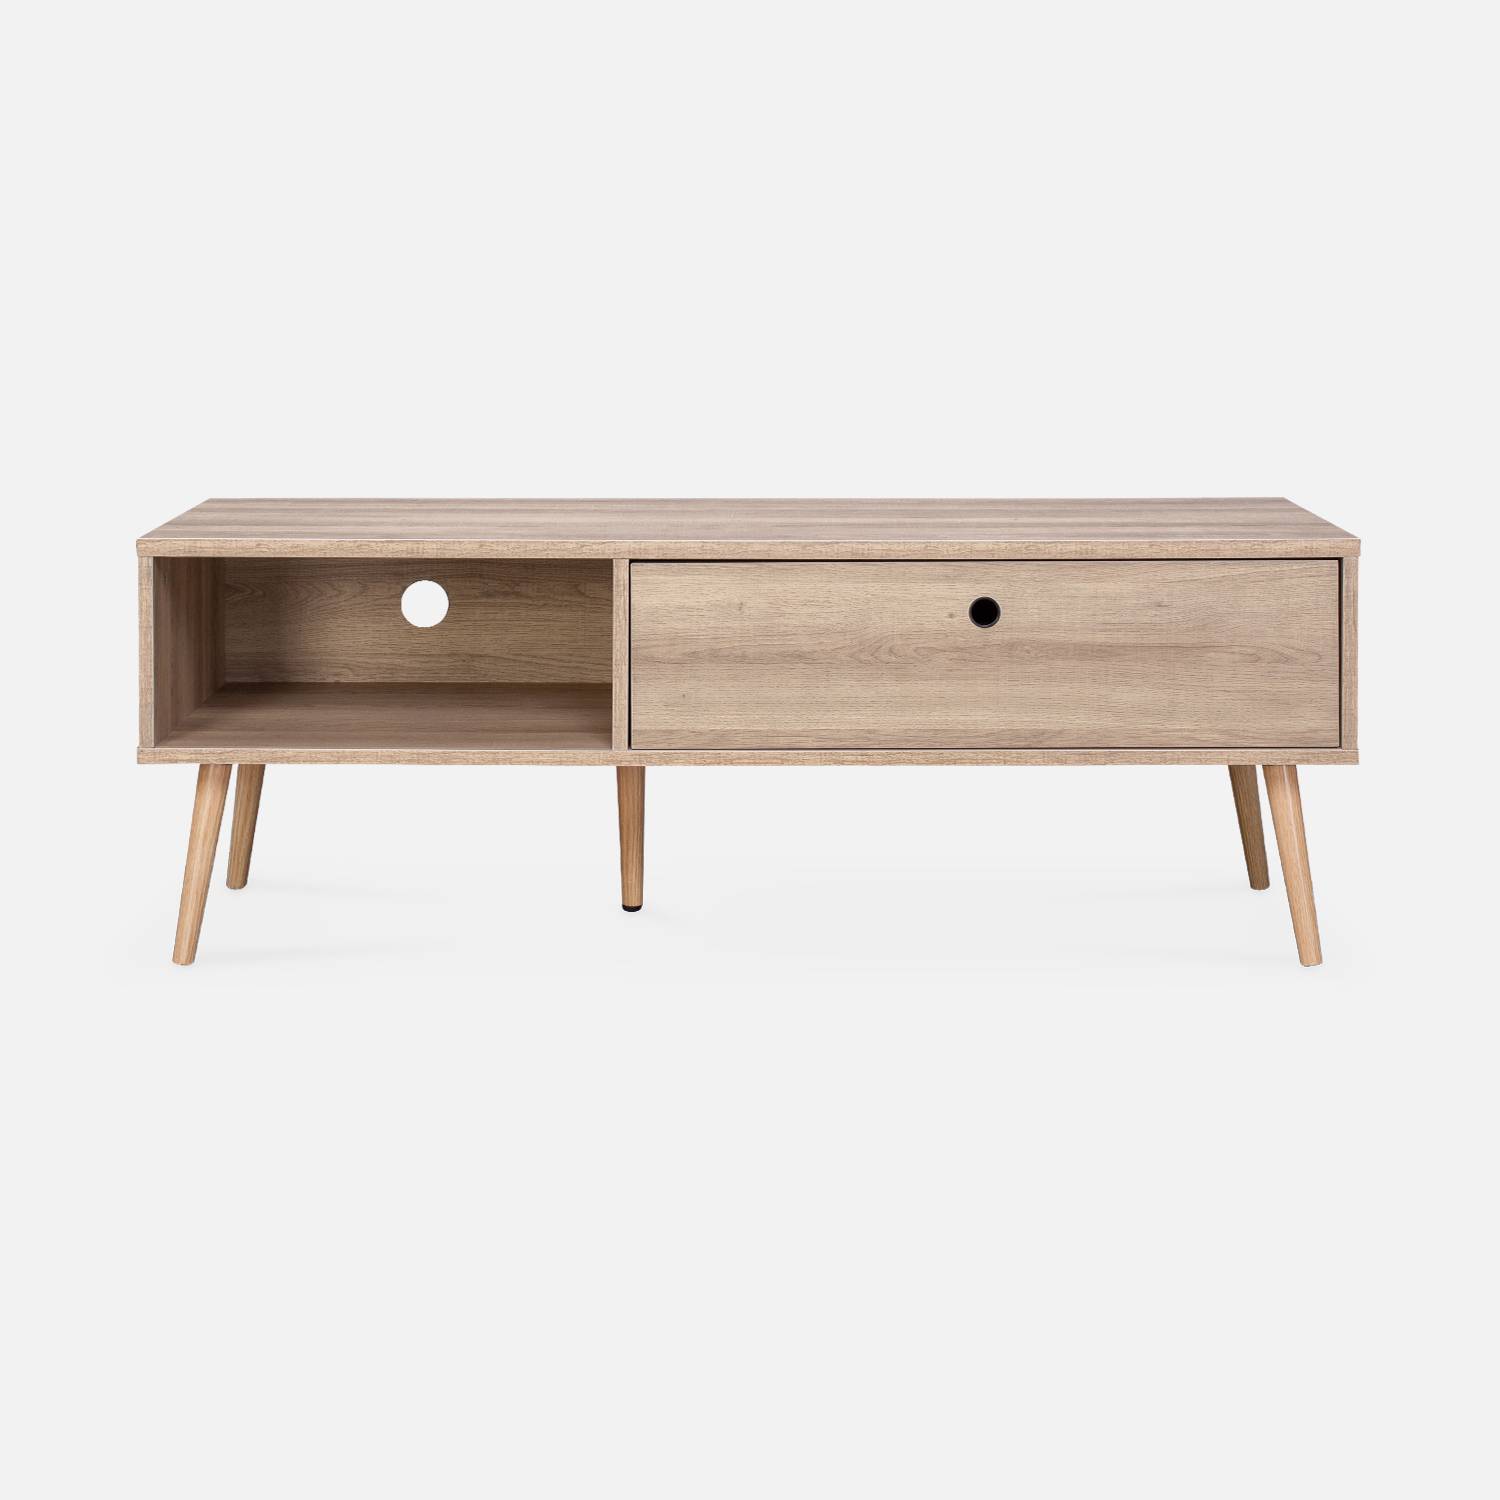 Scandinavian-style wood-effect TV stand with two storage spaces, 120x39x43cm - Scandi - Natural Photo4